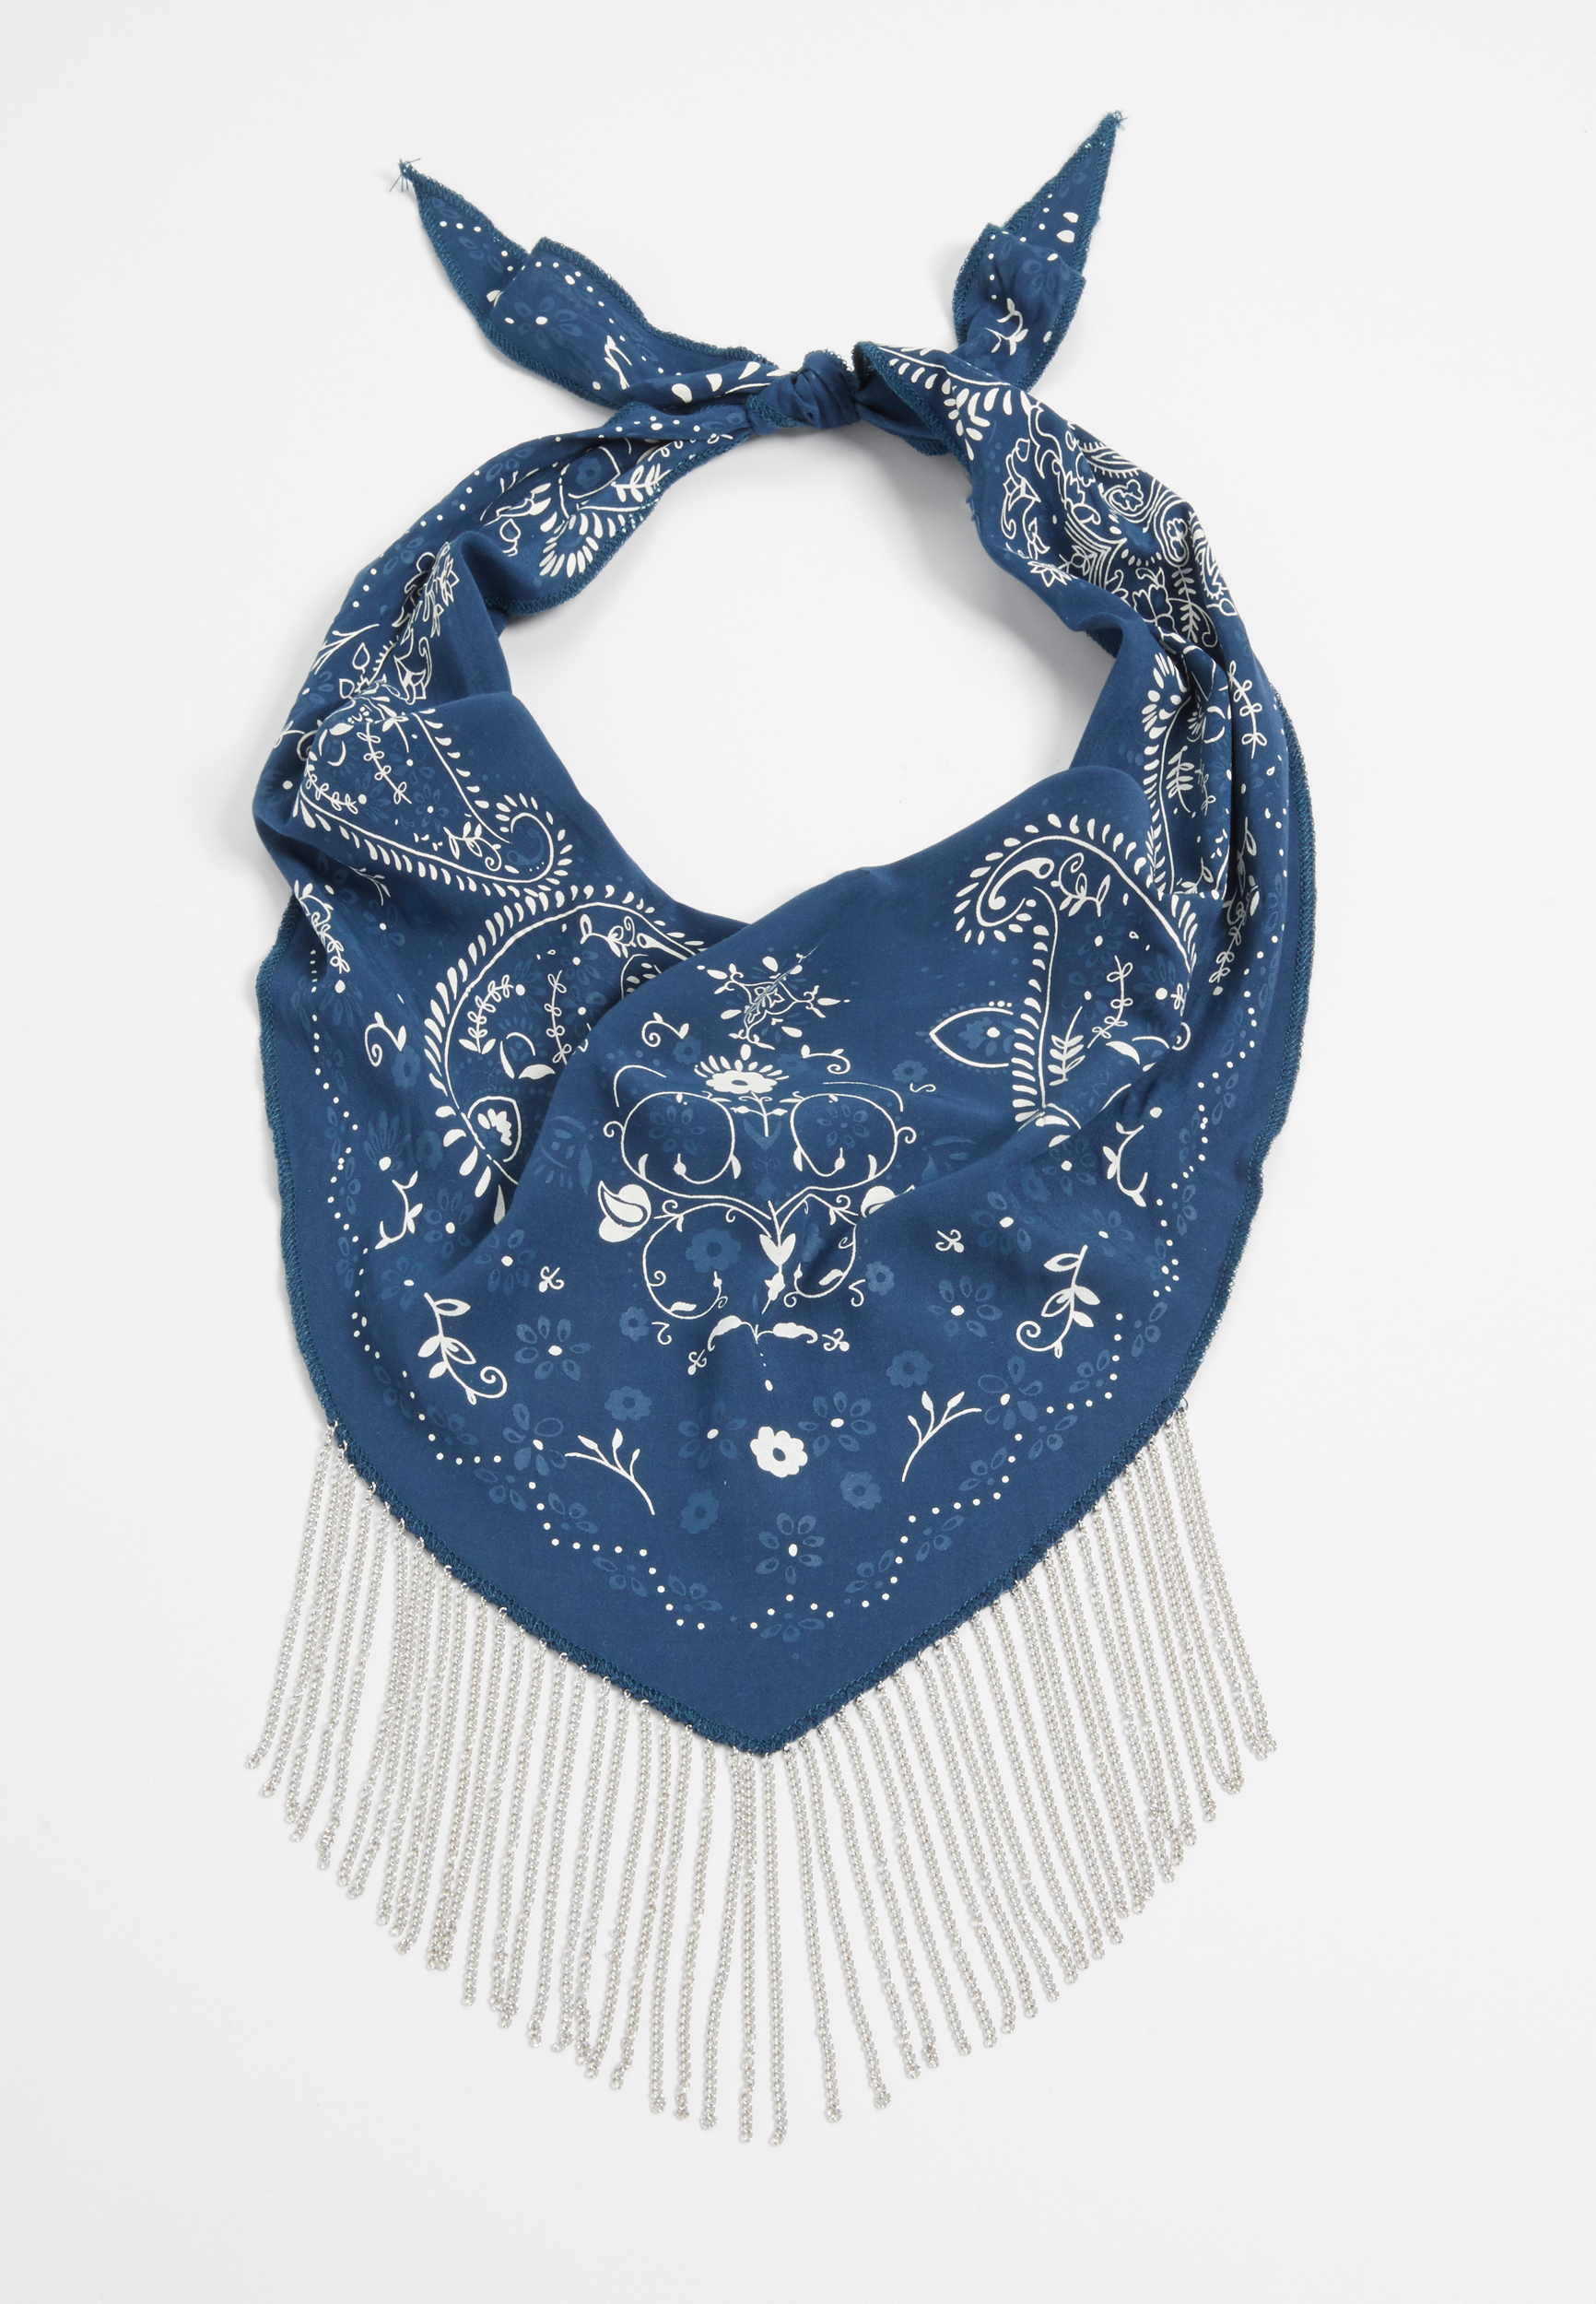 bandana necklace with chain fringe in blue | maurices